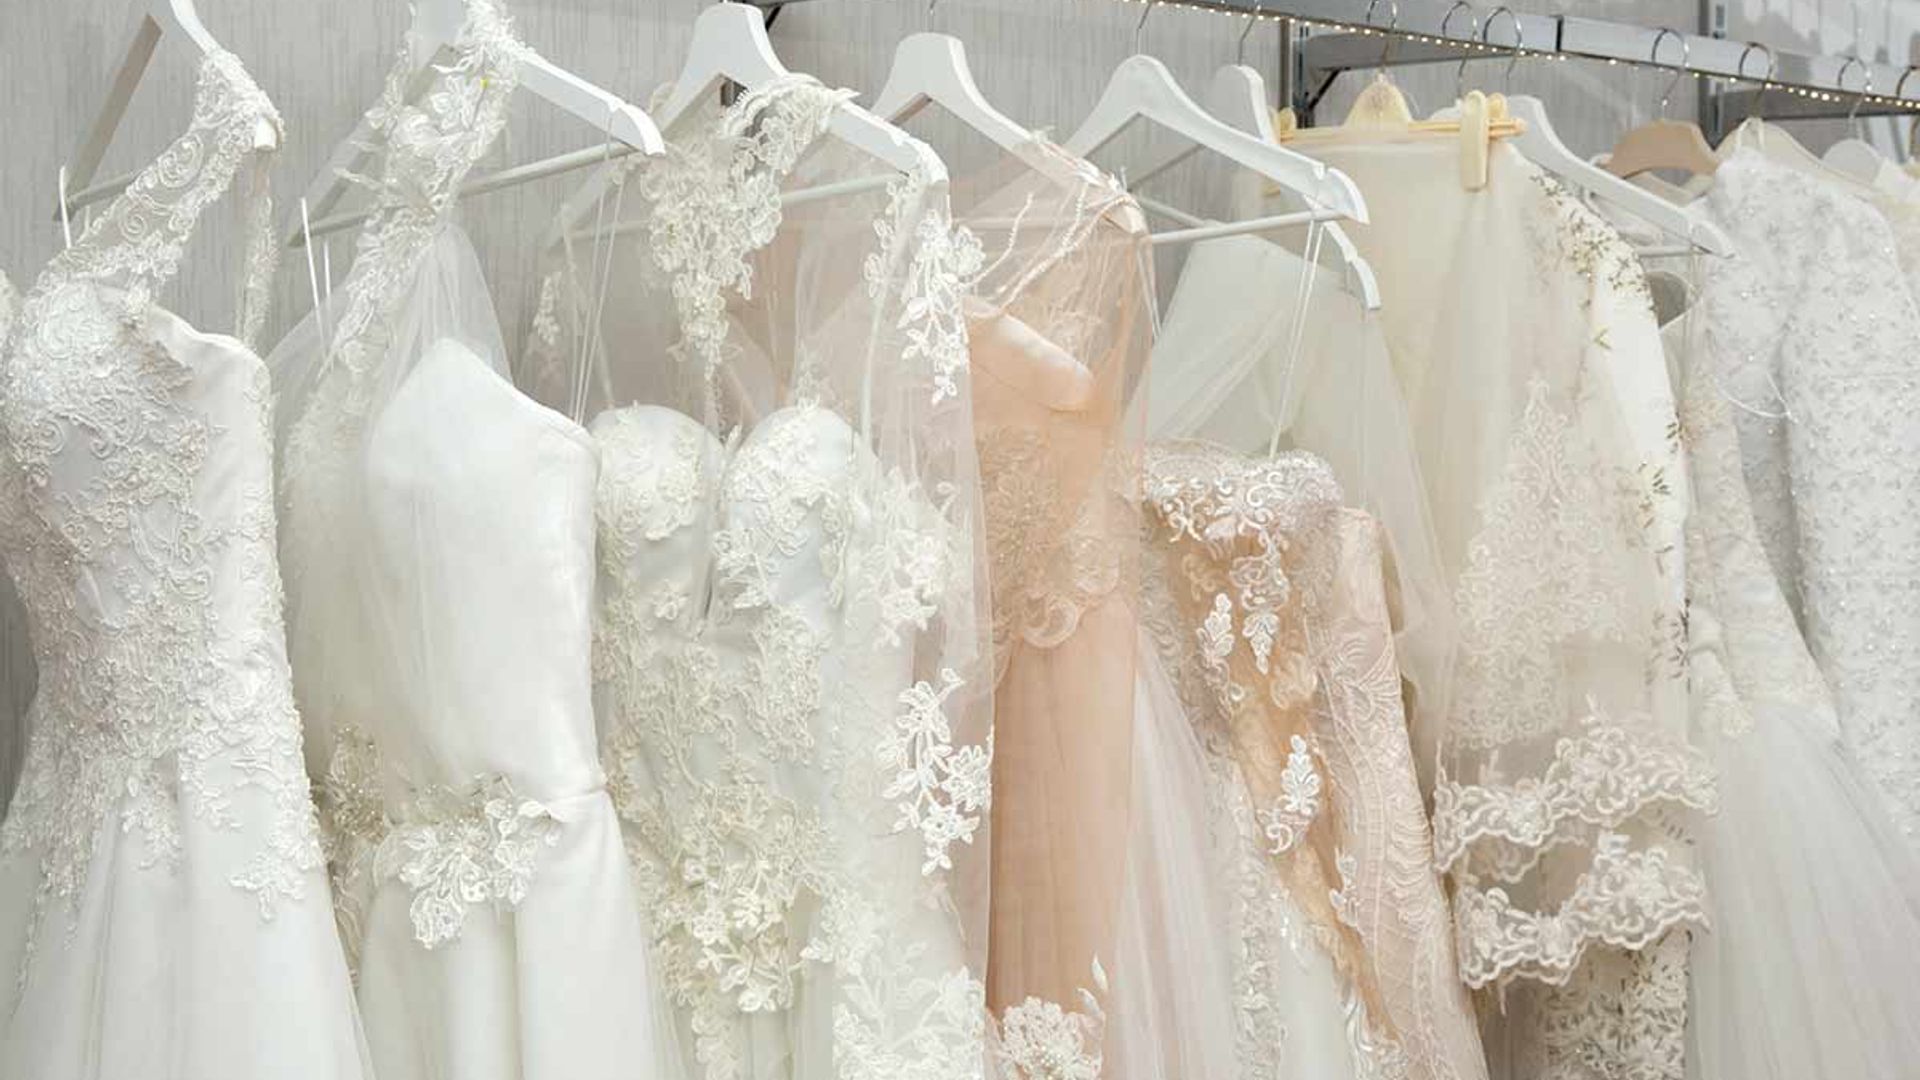 Debenhams is selling wedding dresses for just £20 – find out where you can bag a bargain